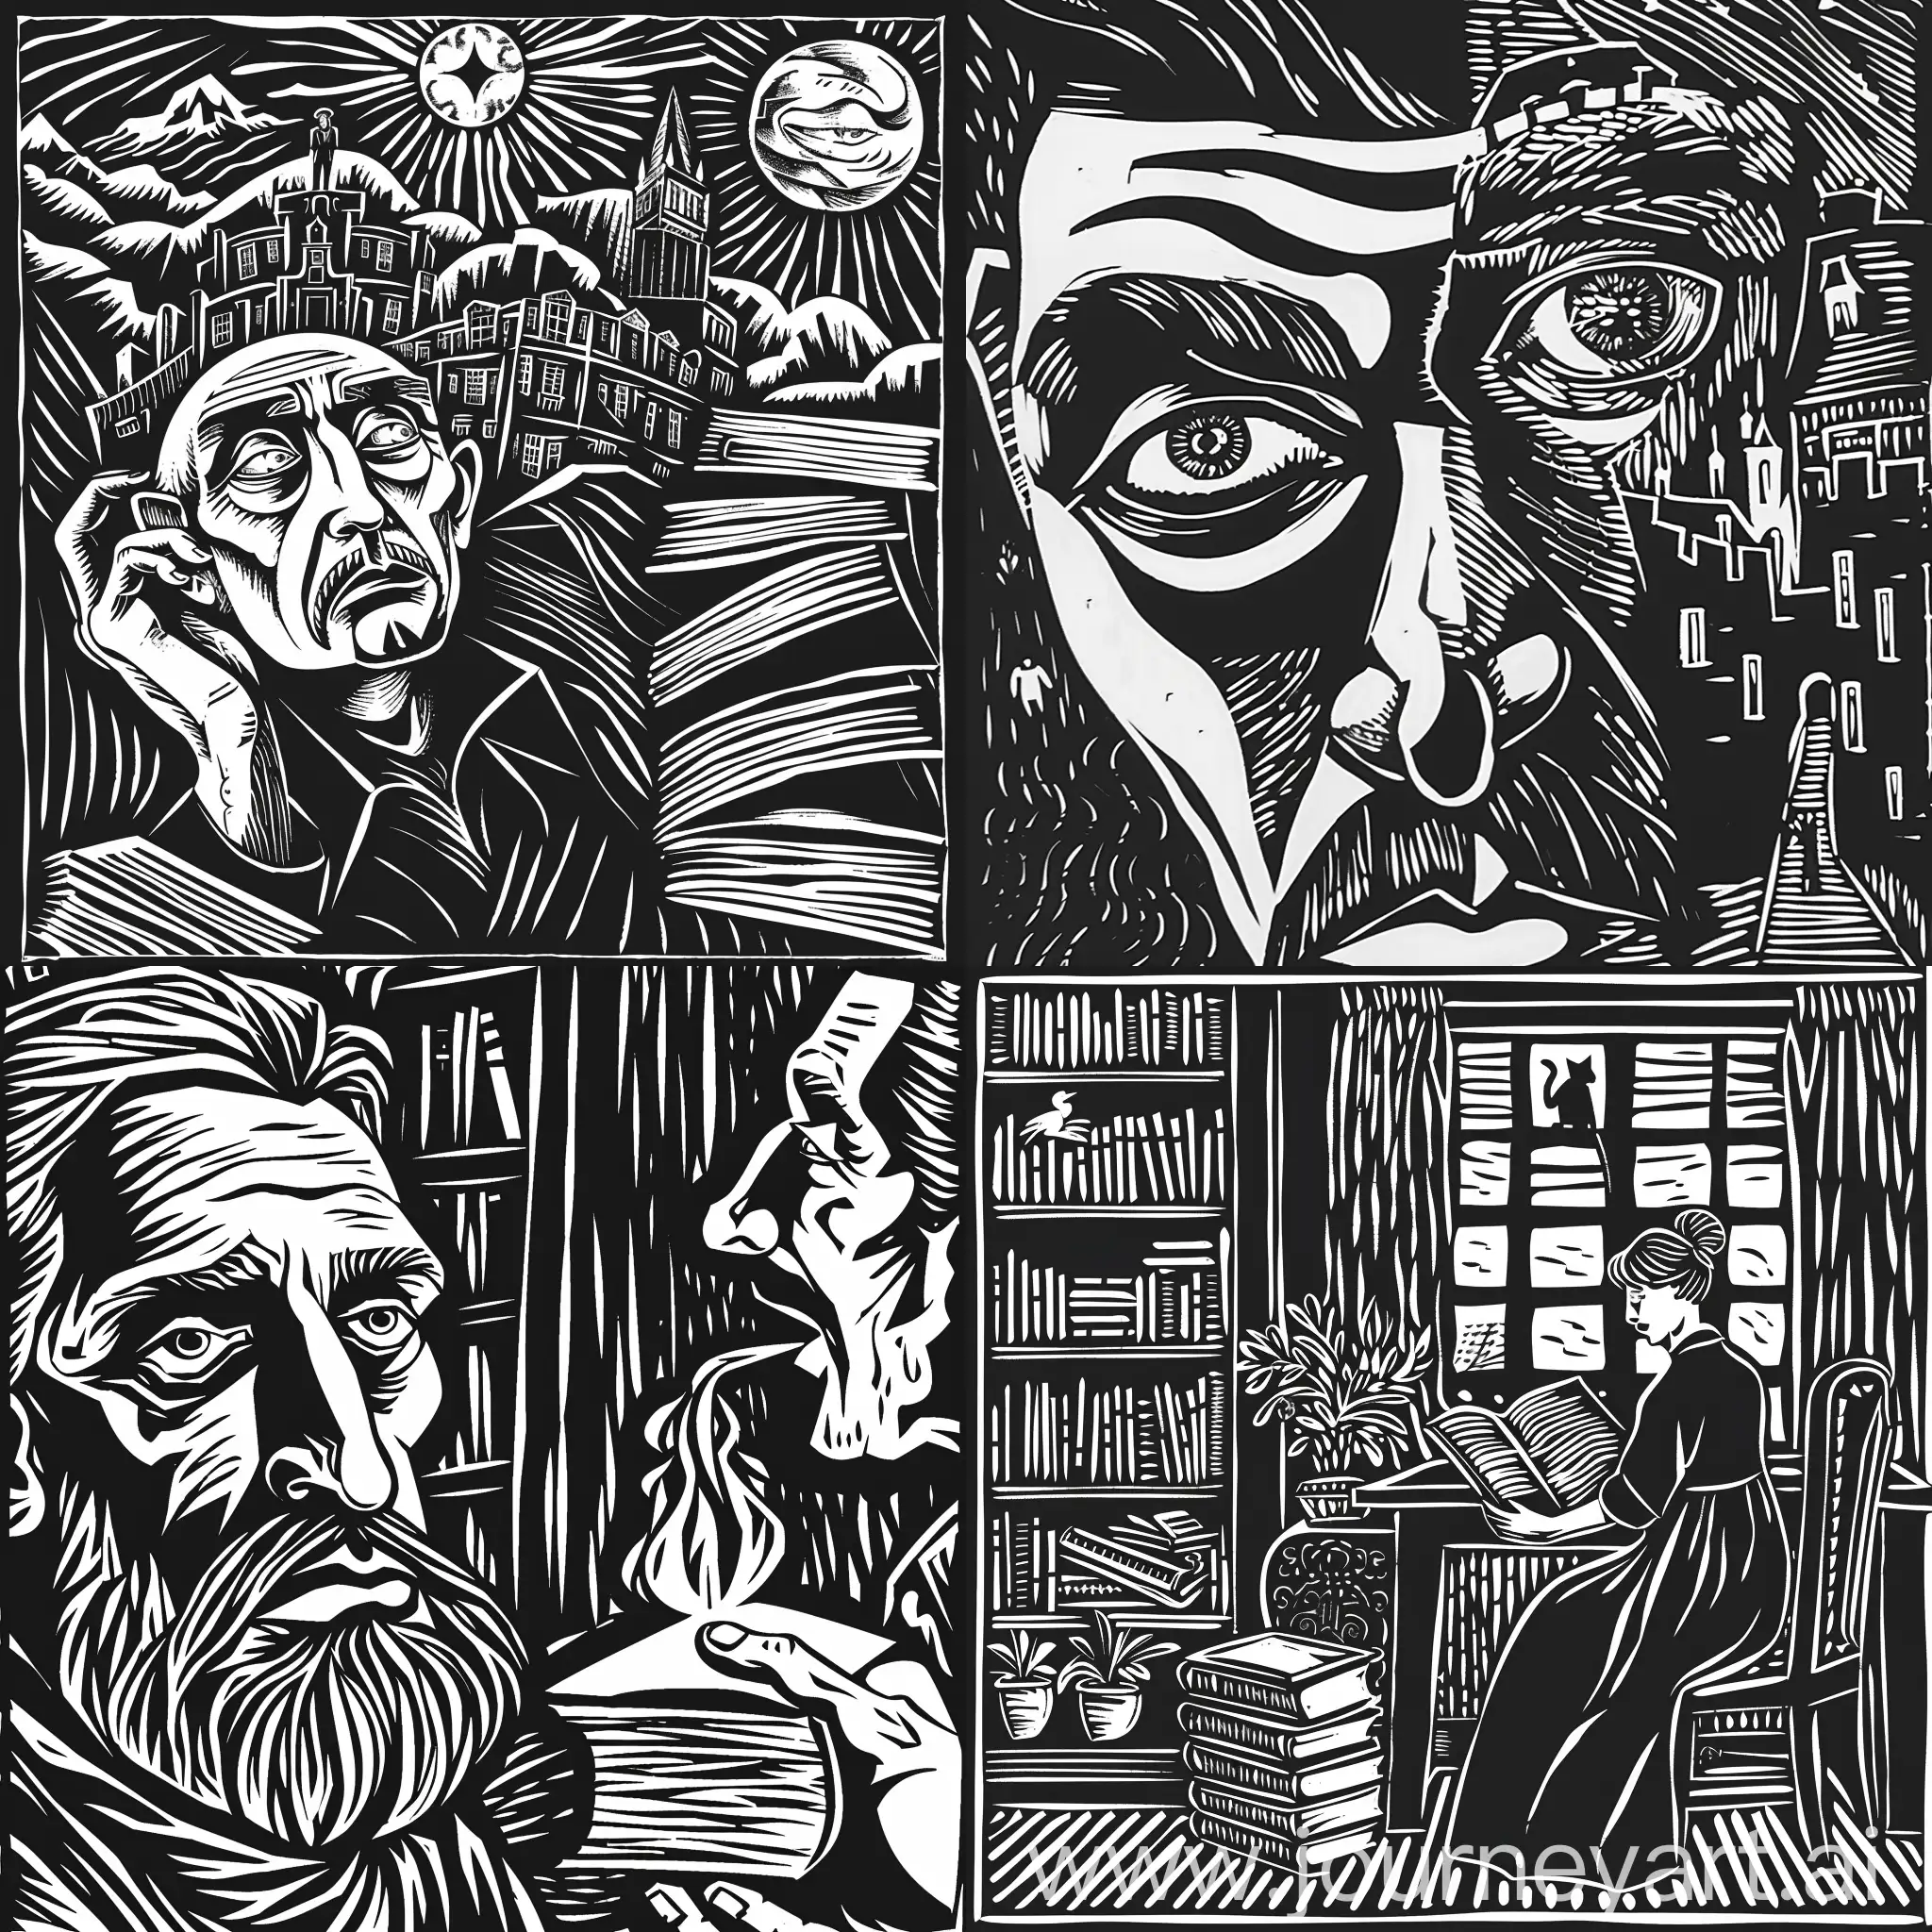 create an illustration for the novel"  The Master and Margarita" in the style of linocut